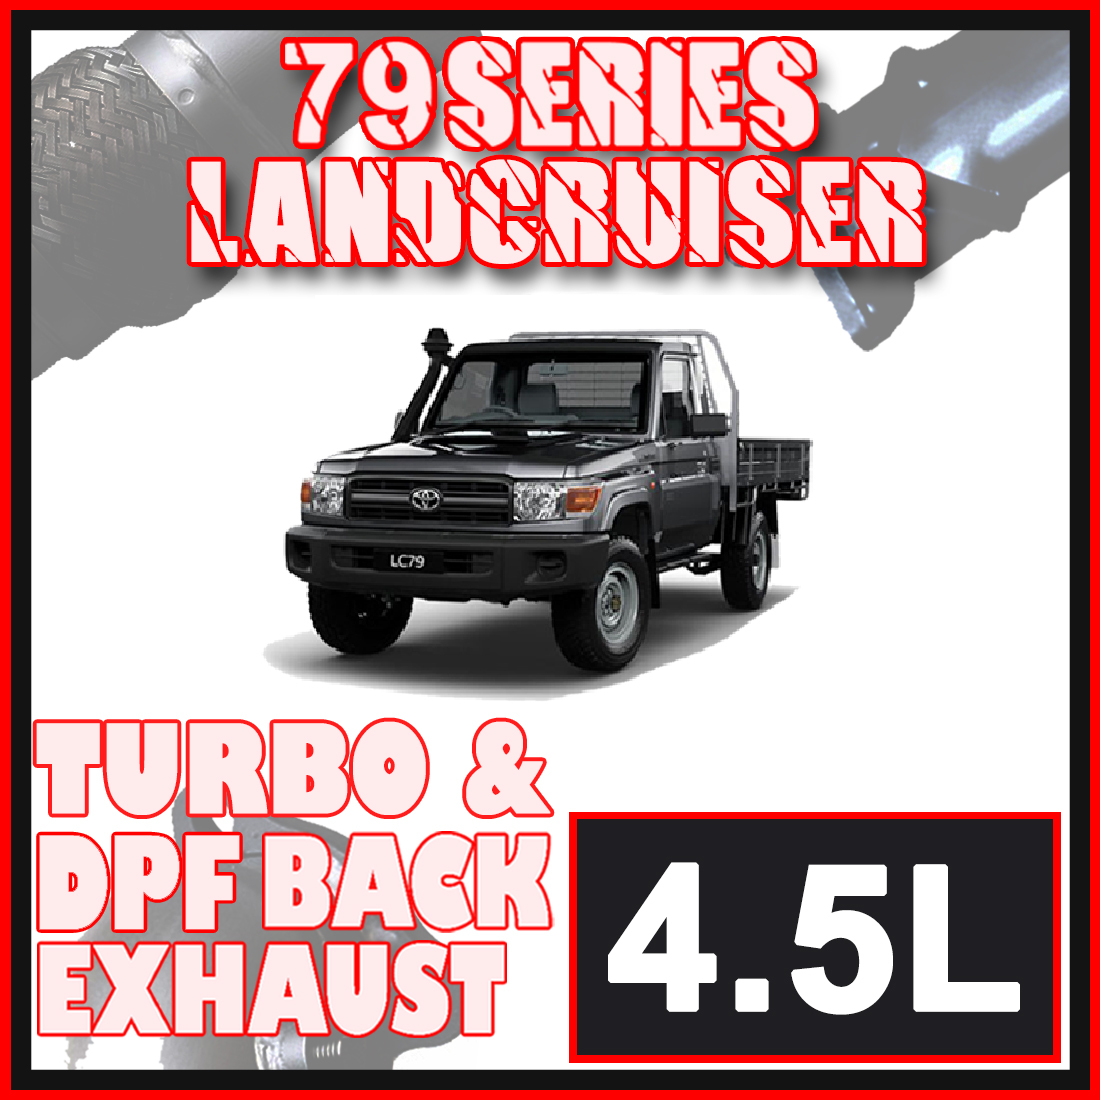 Toyota Landcruiser Exhaust 79 Series Single Cab 3" & 3.5" DPF & Turbo Back Systems image